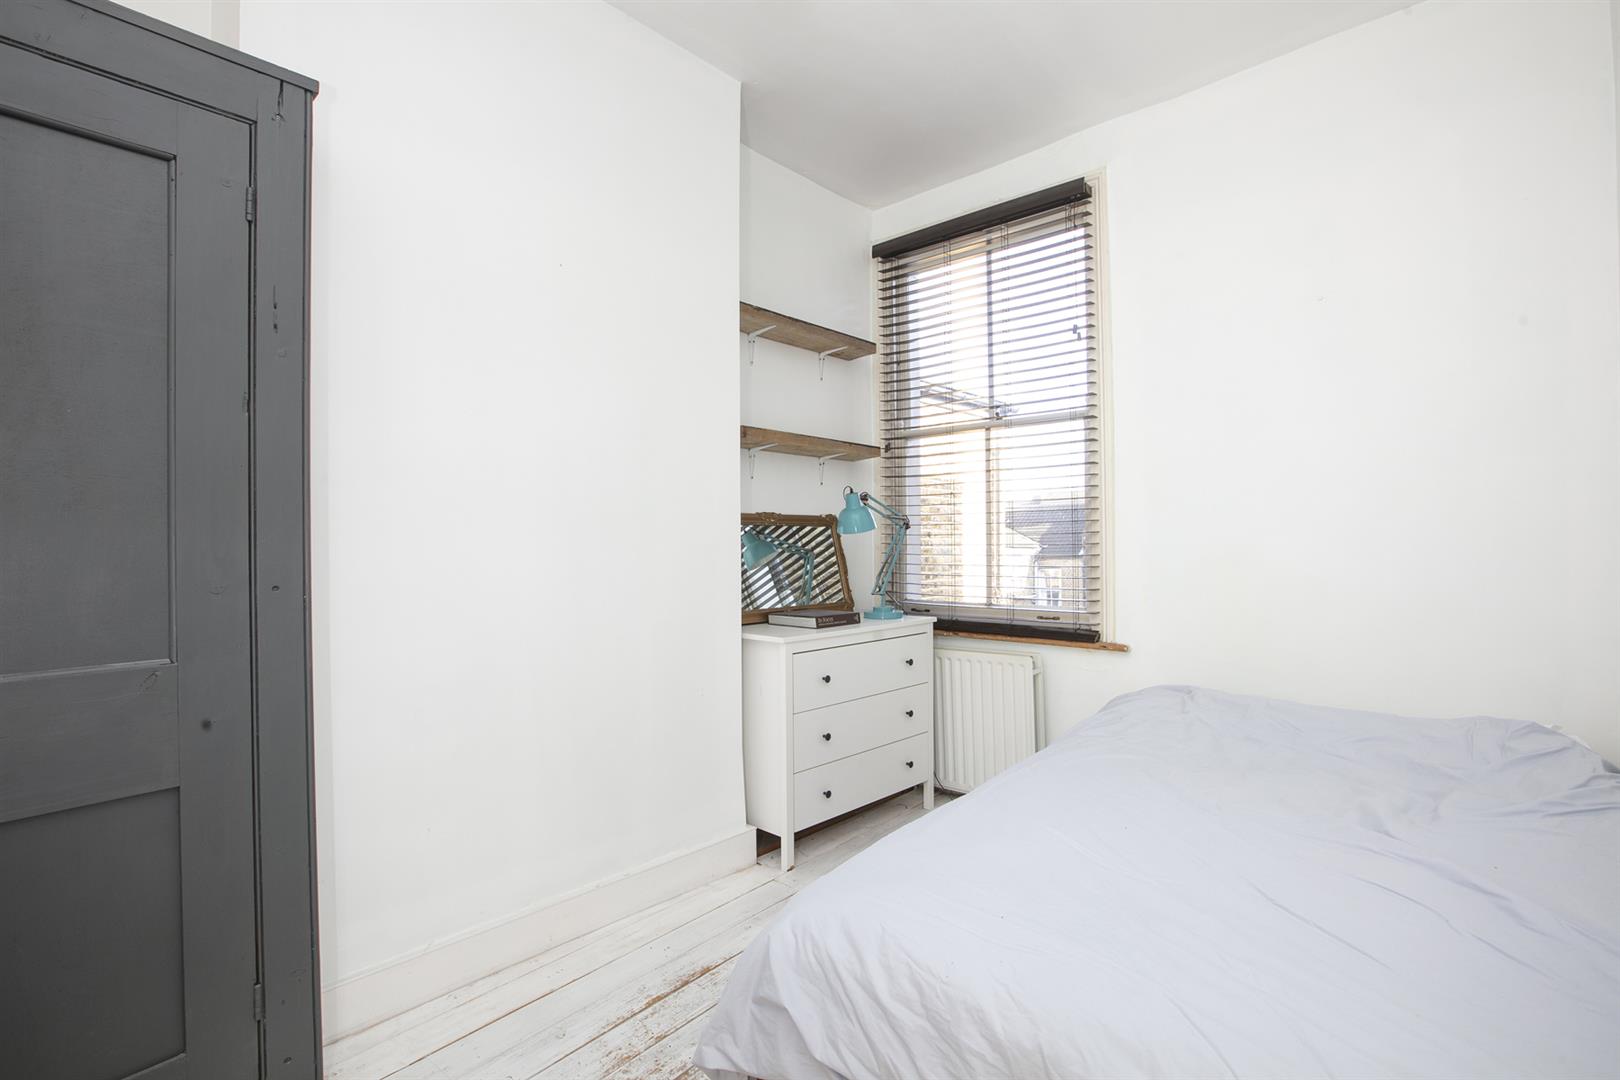 Flat - Conversion For Sale in Shenley Road, London, SE5 782 view10